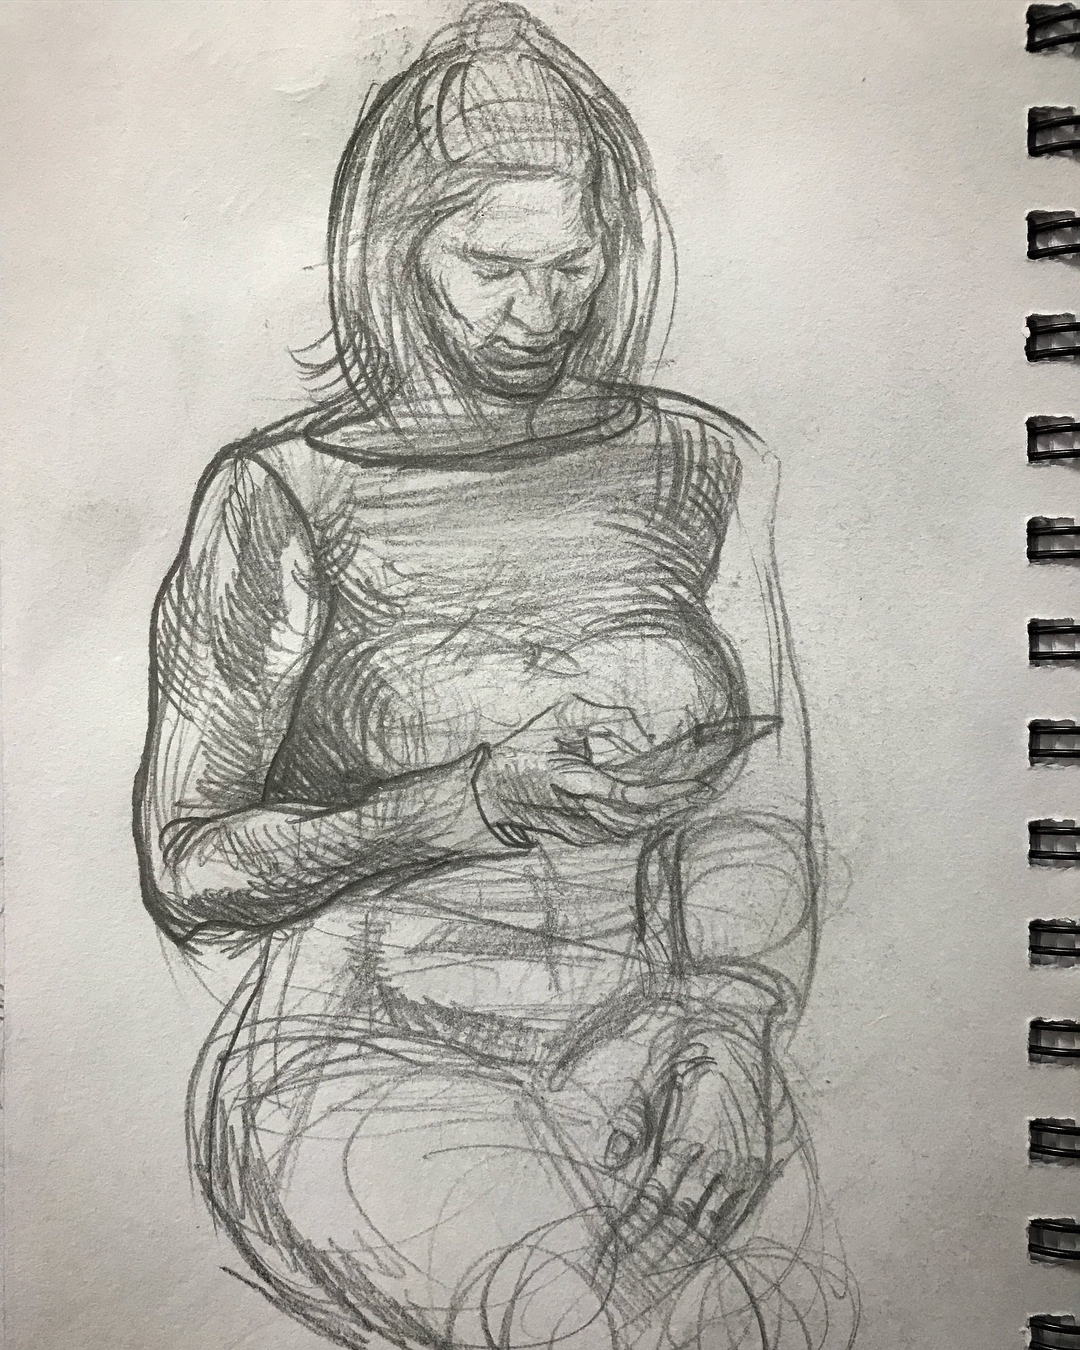 Sketches in the Moscow metro. - My, Sketch, Sketch, Sketch, Fetishism, beauty, Pencil, Metro, Longpost